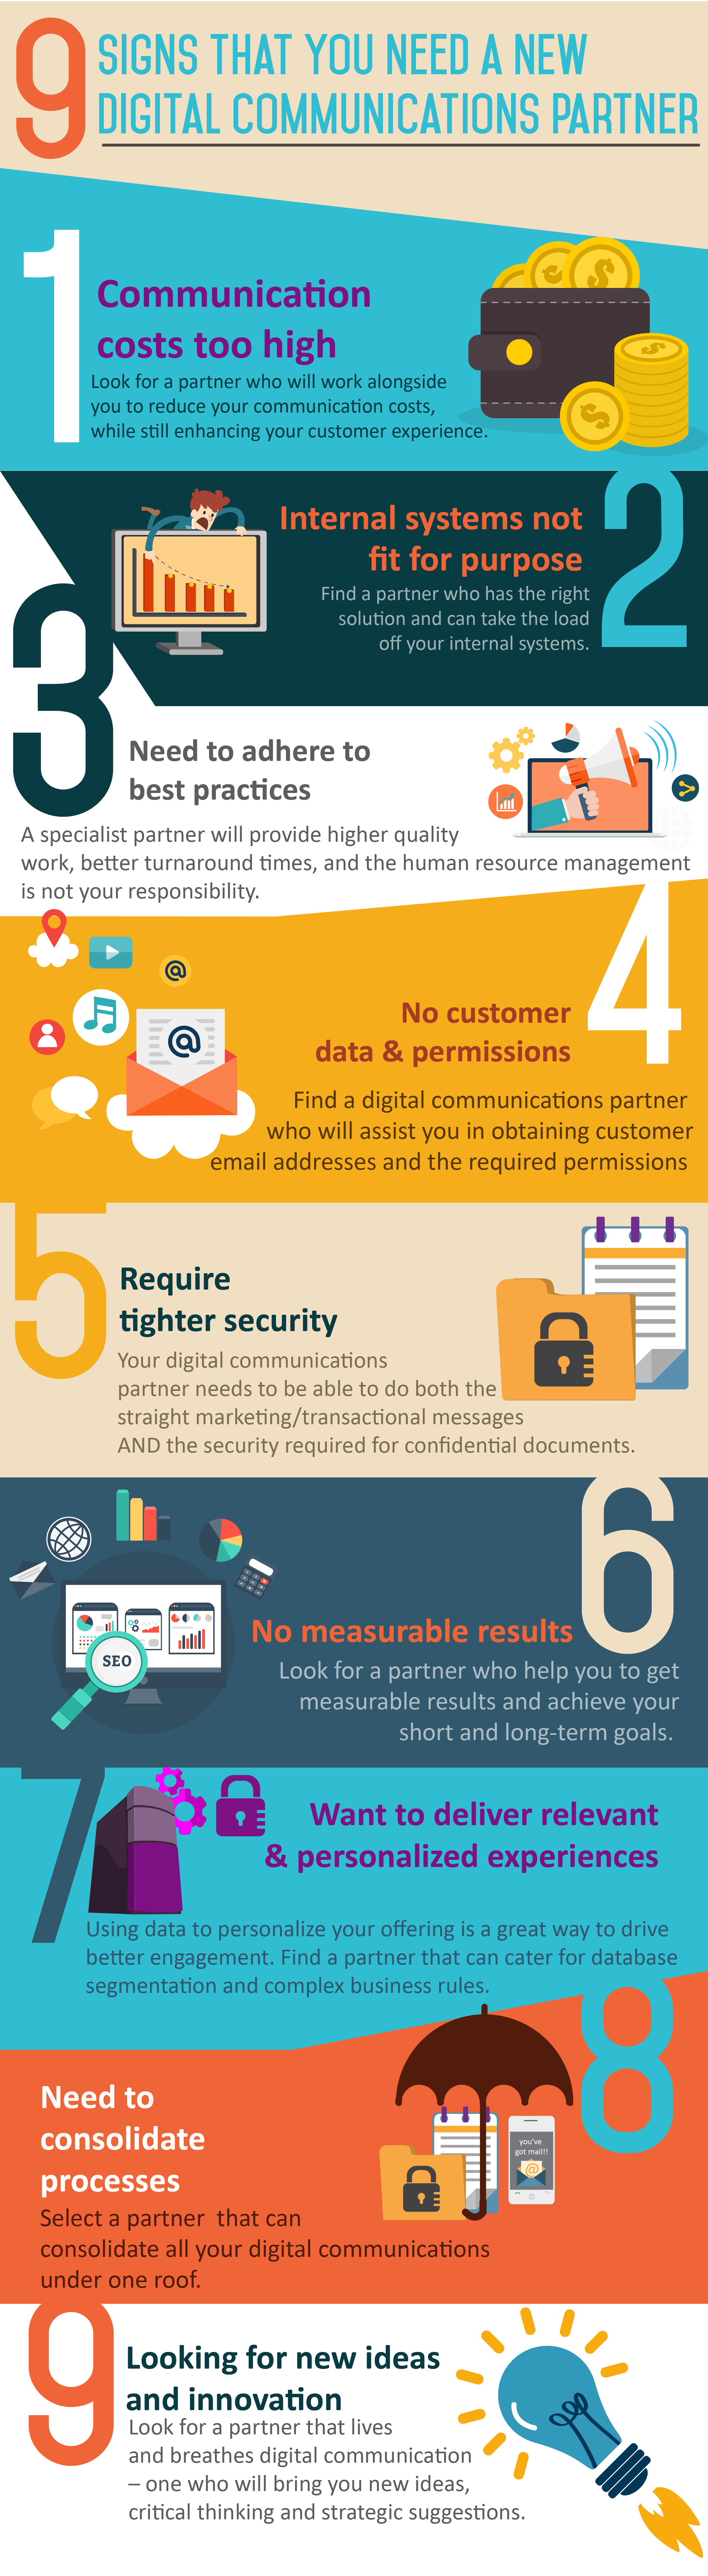 Download Infographic 9 Signs That You Need A New Digital Communications Partner